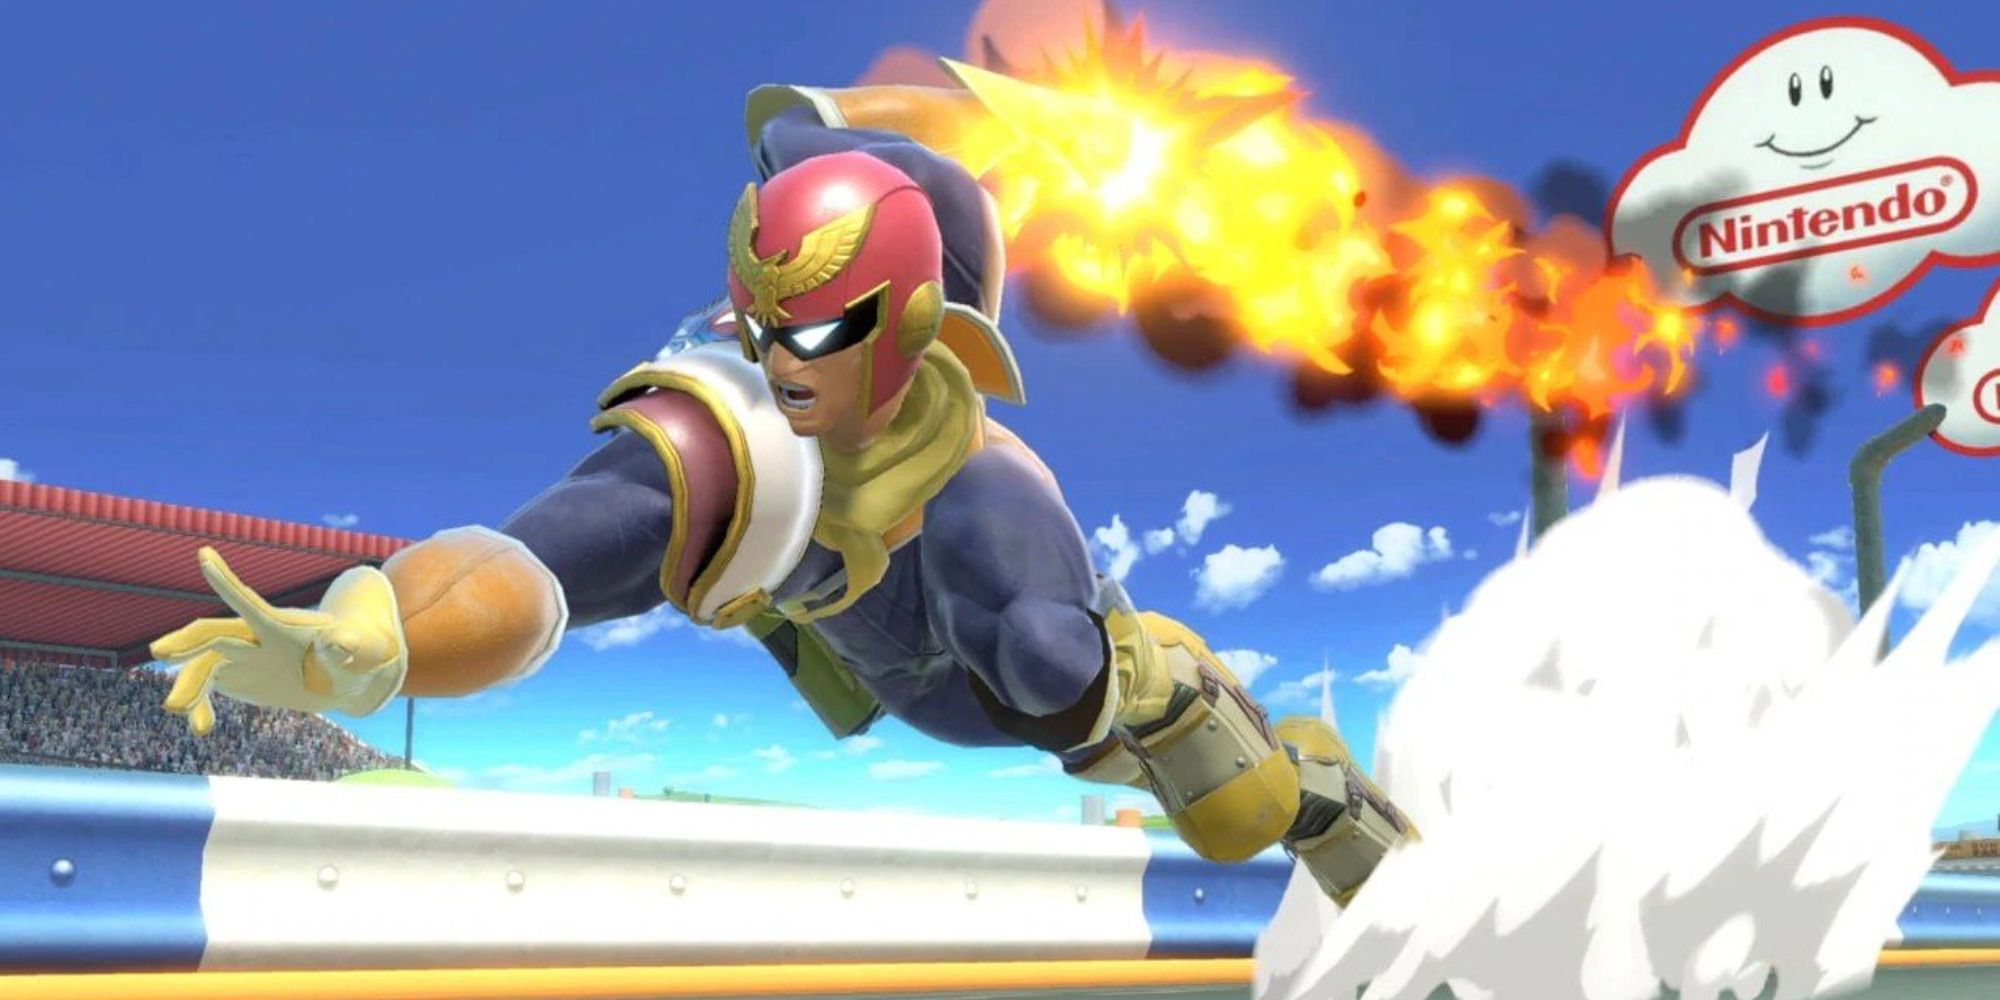 Captain Falcon dashing forward with a flaming punch